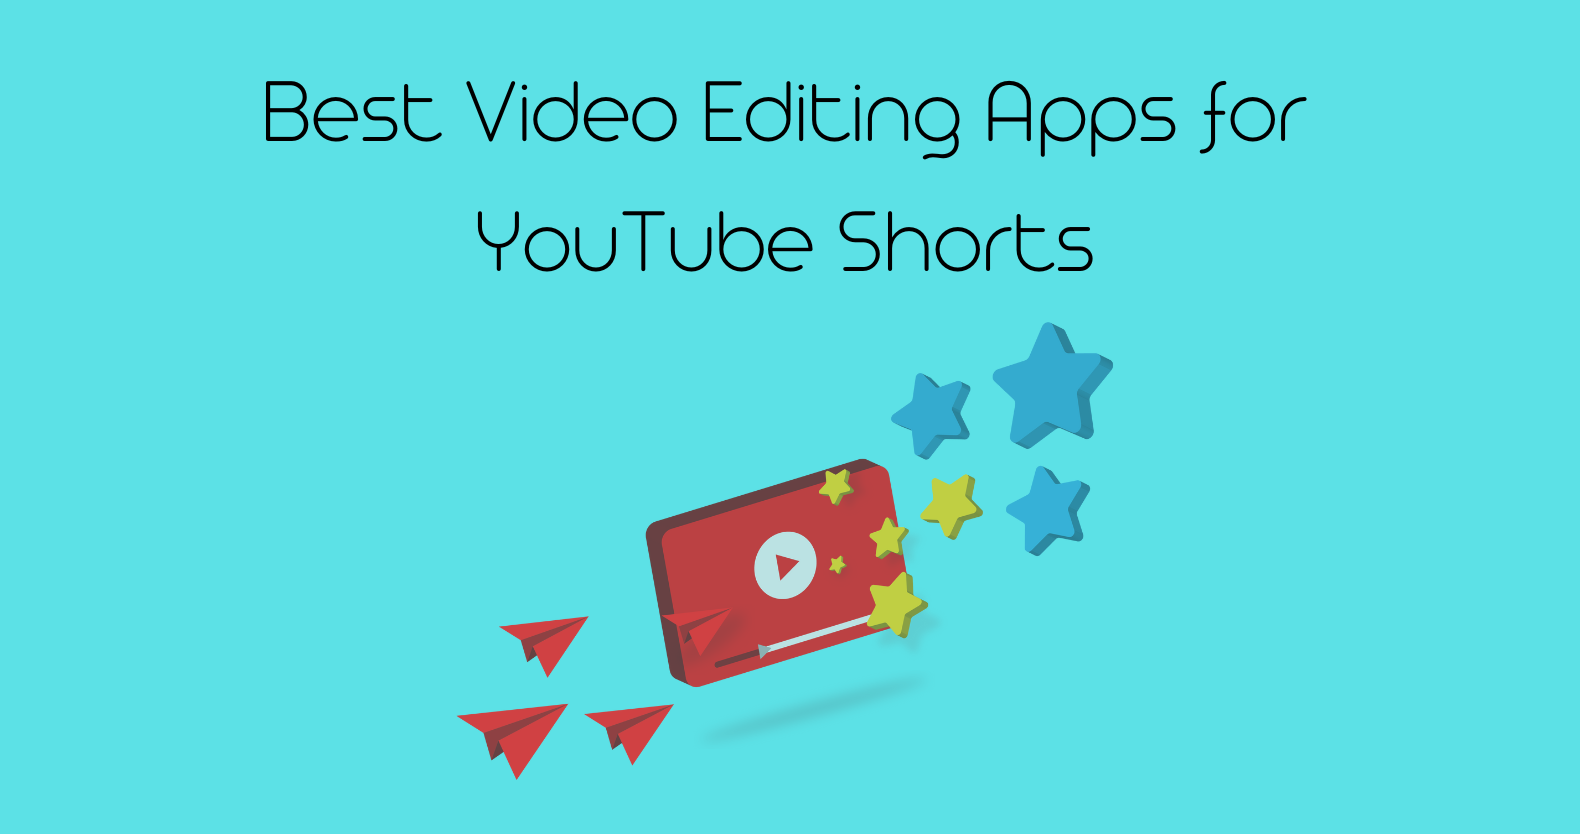 best video editing apps for YouTube shorts